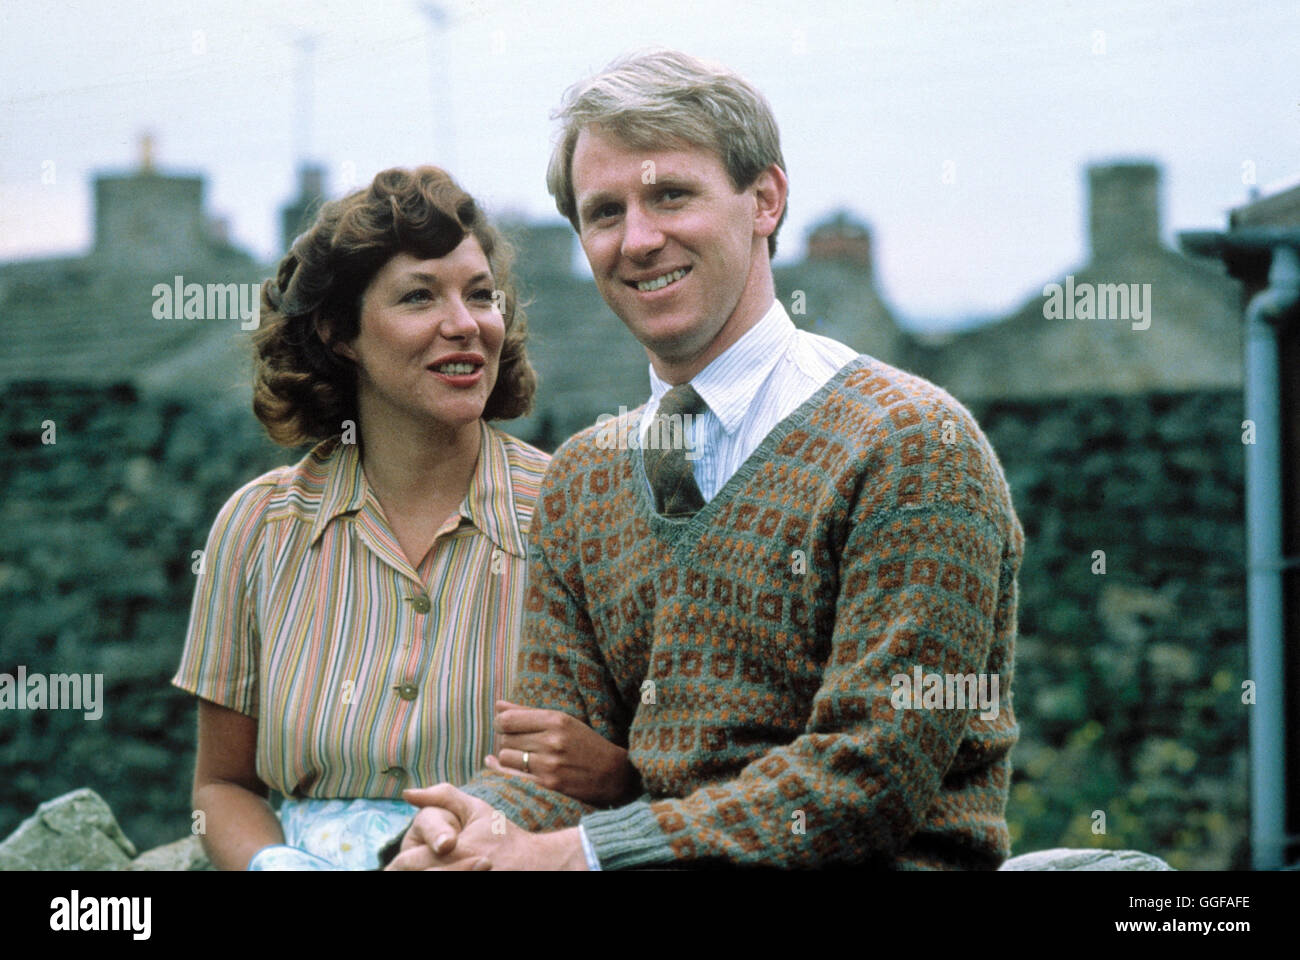 DER DOKTOR UND DAS LIEBE VIEH / All creatures great and small / CAROL DRINKWATER (Helen Herriot), PETER DAVISON (Tristan Farnon) aka. All creatures great and small Stock Photo